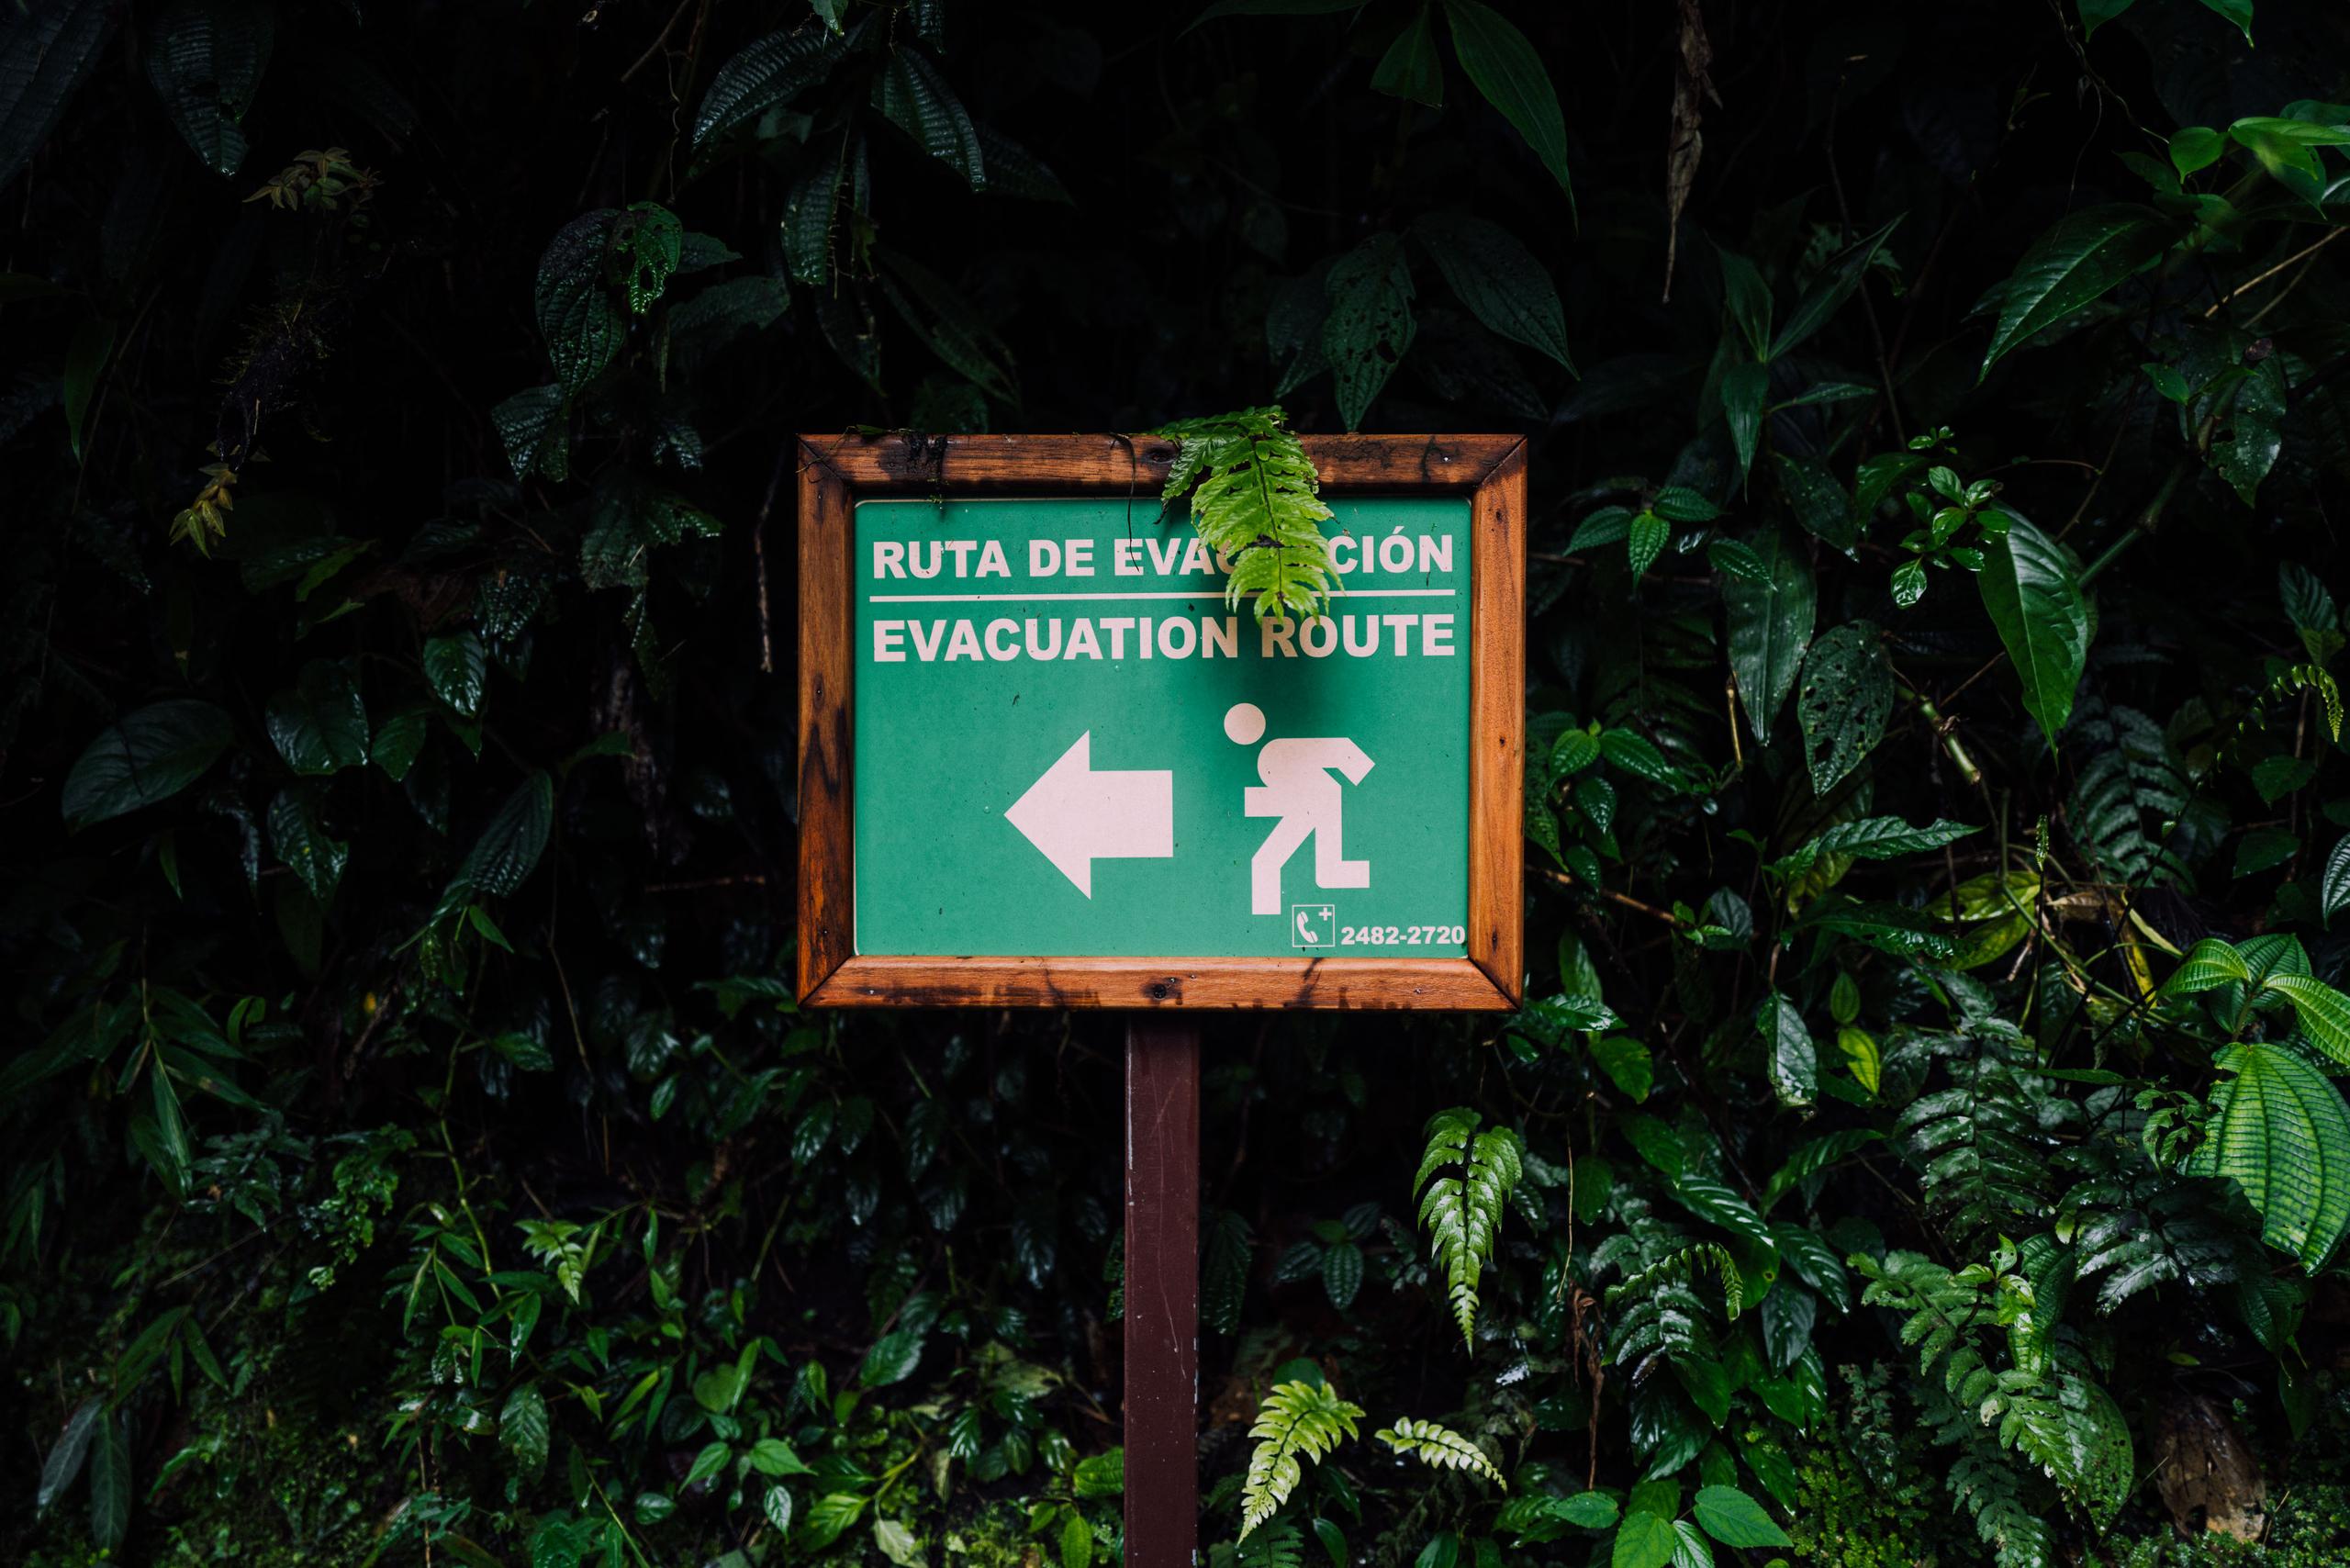 Evacuation route sign in Costa Rica against green jungle background